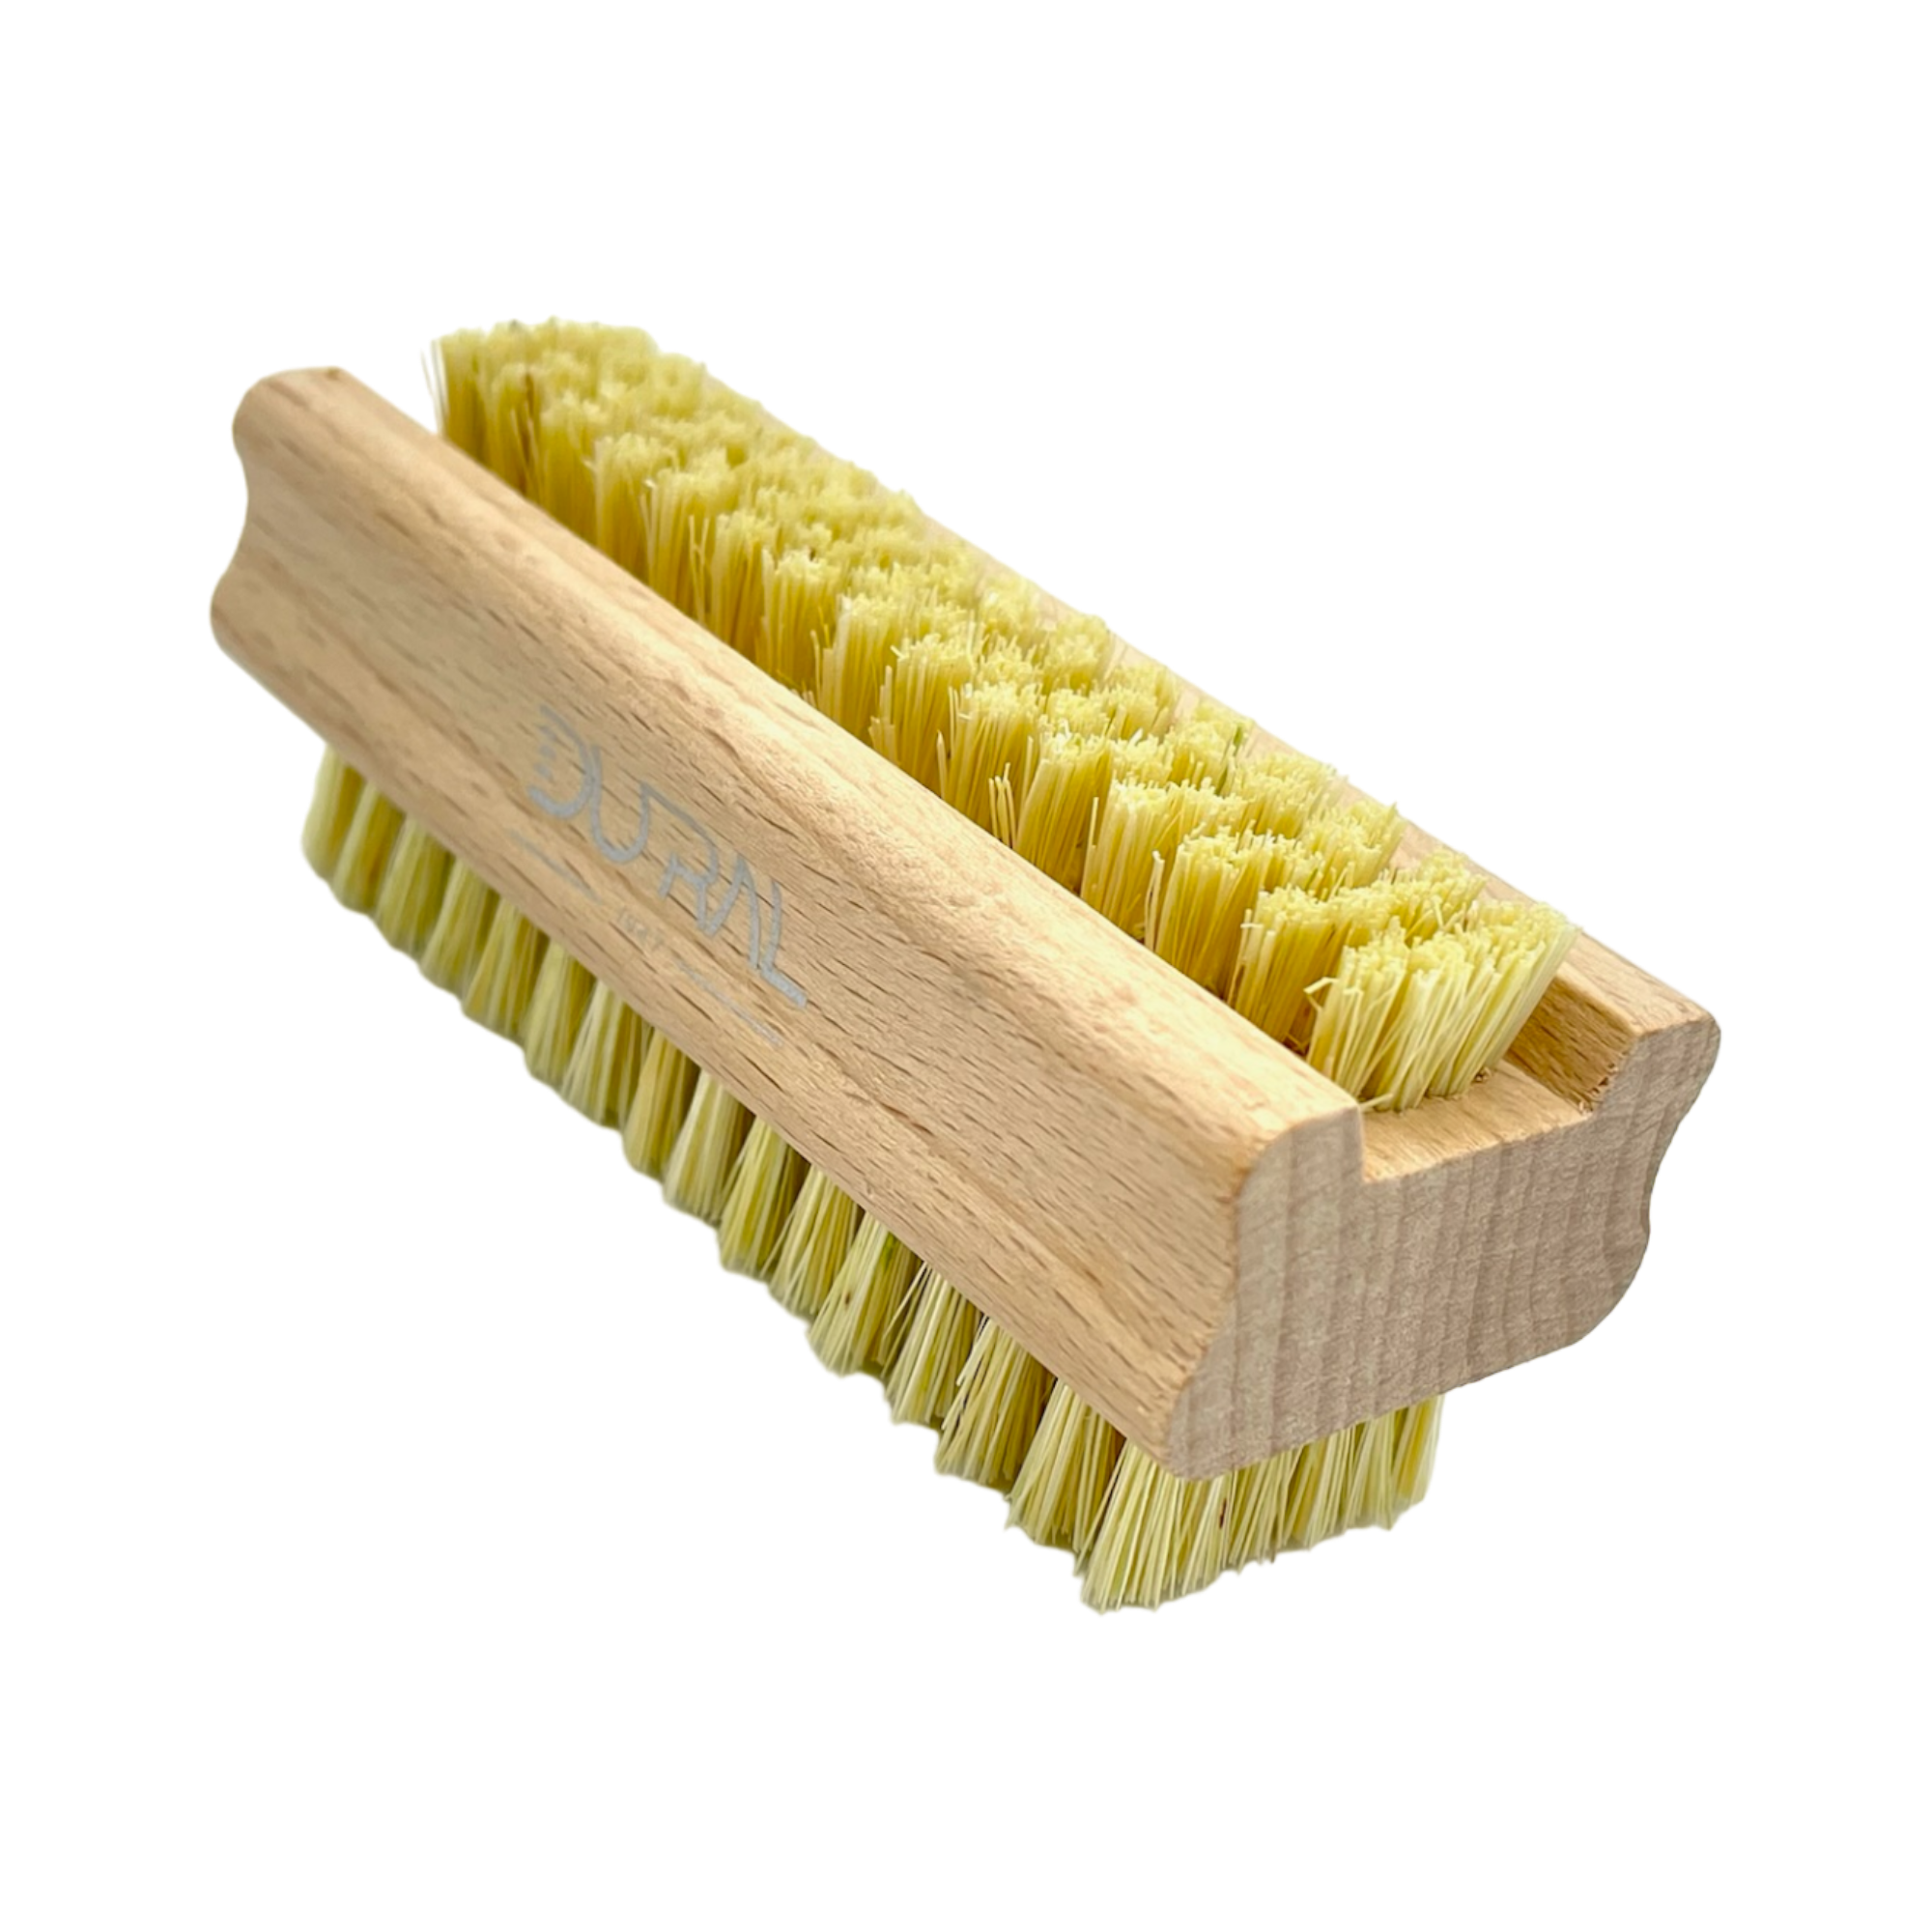 Dural plain Beech wood hand/nails brush with Tampico fiber -4/6 rows